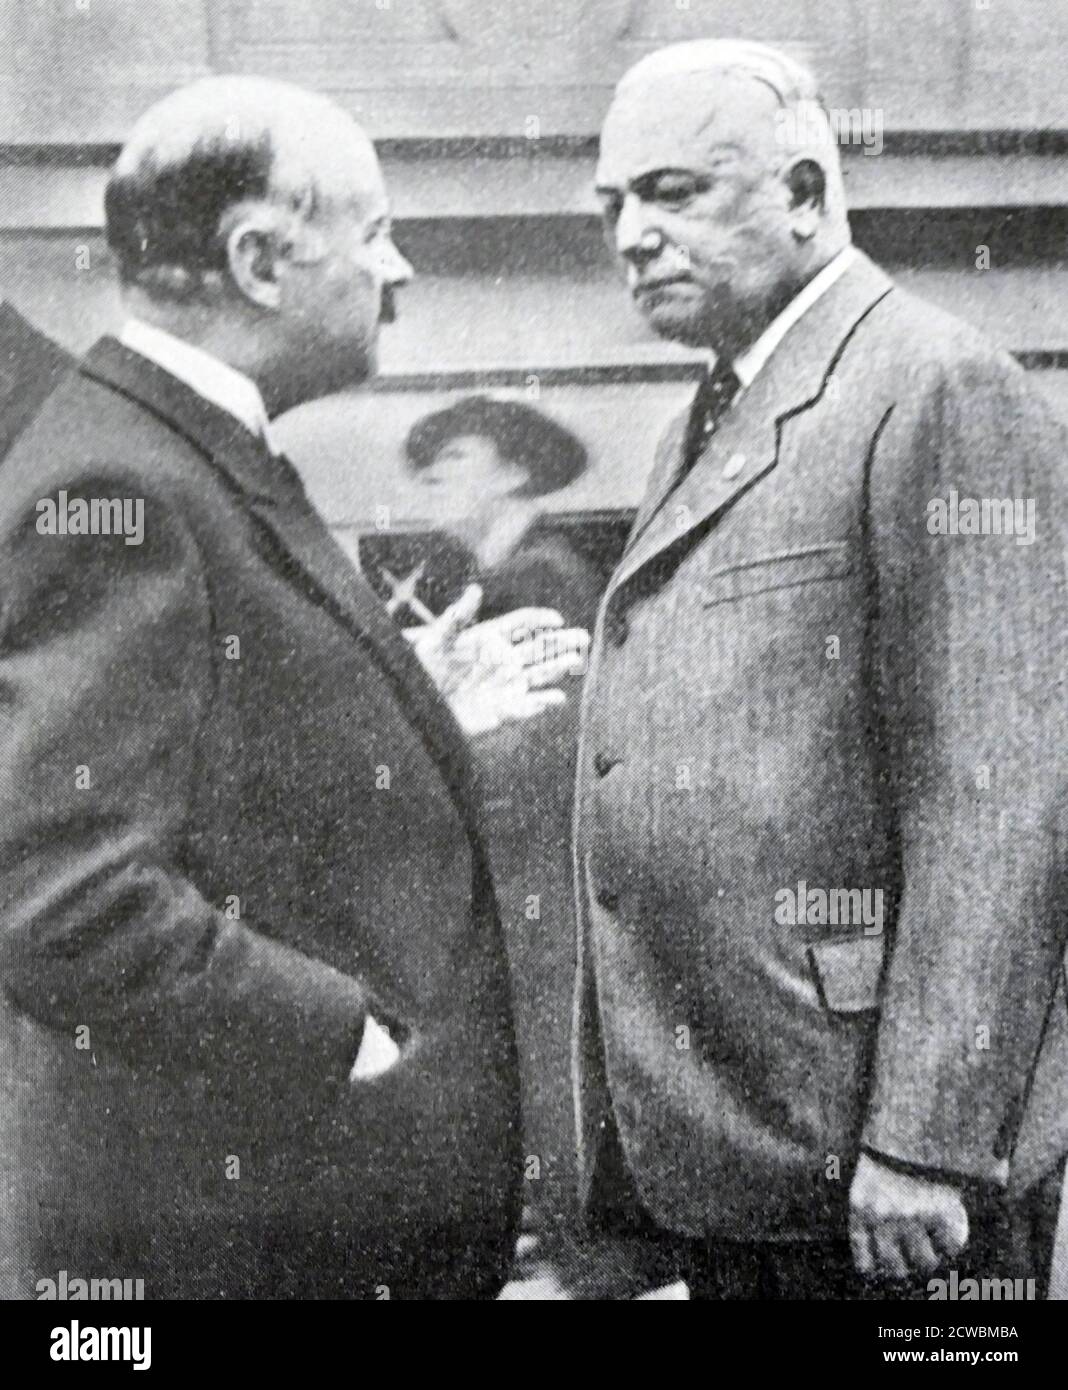 Black and white photo of the German foreign minister Konstantin von Neurath (1873-1956) with the French Ambassador Francois Poncet. Stock Photo